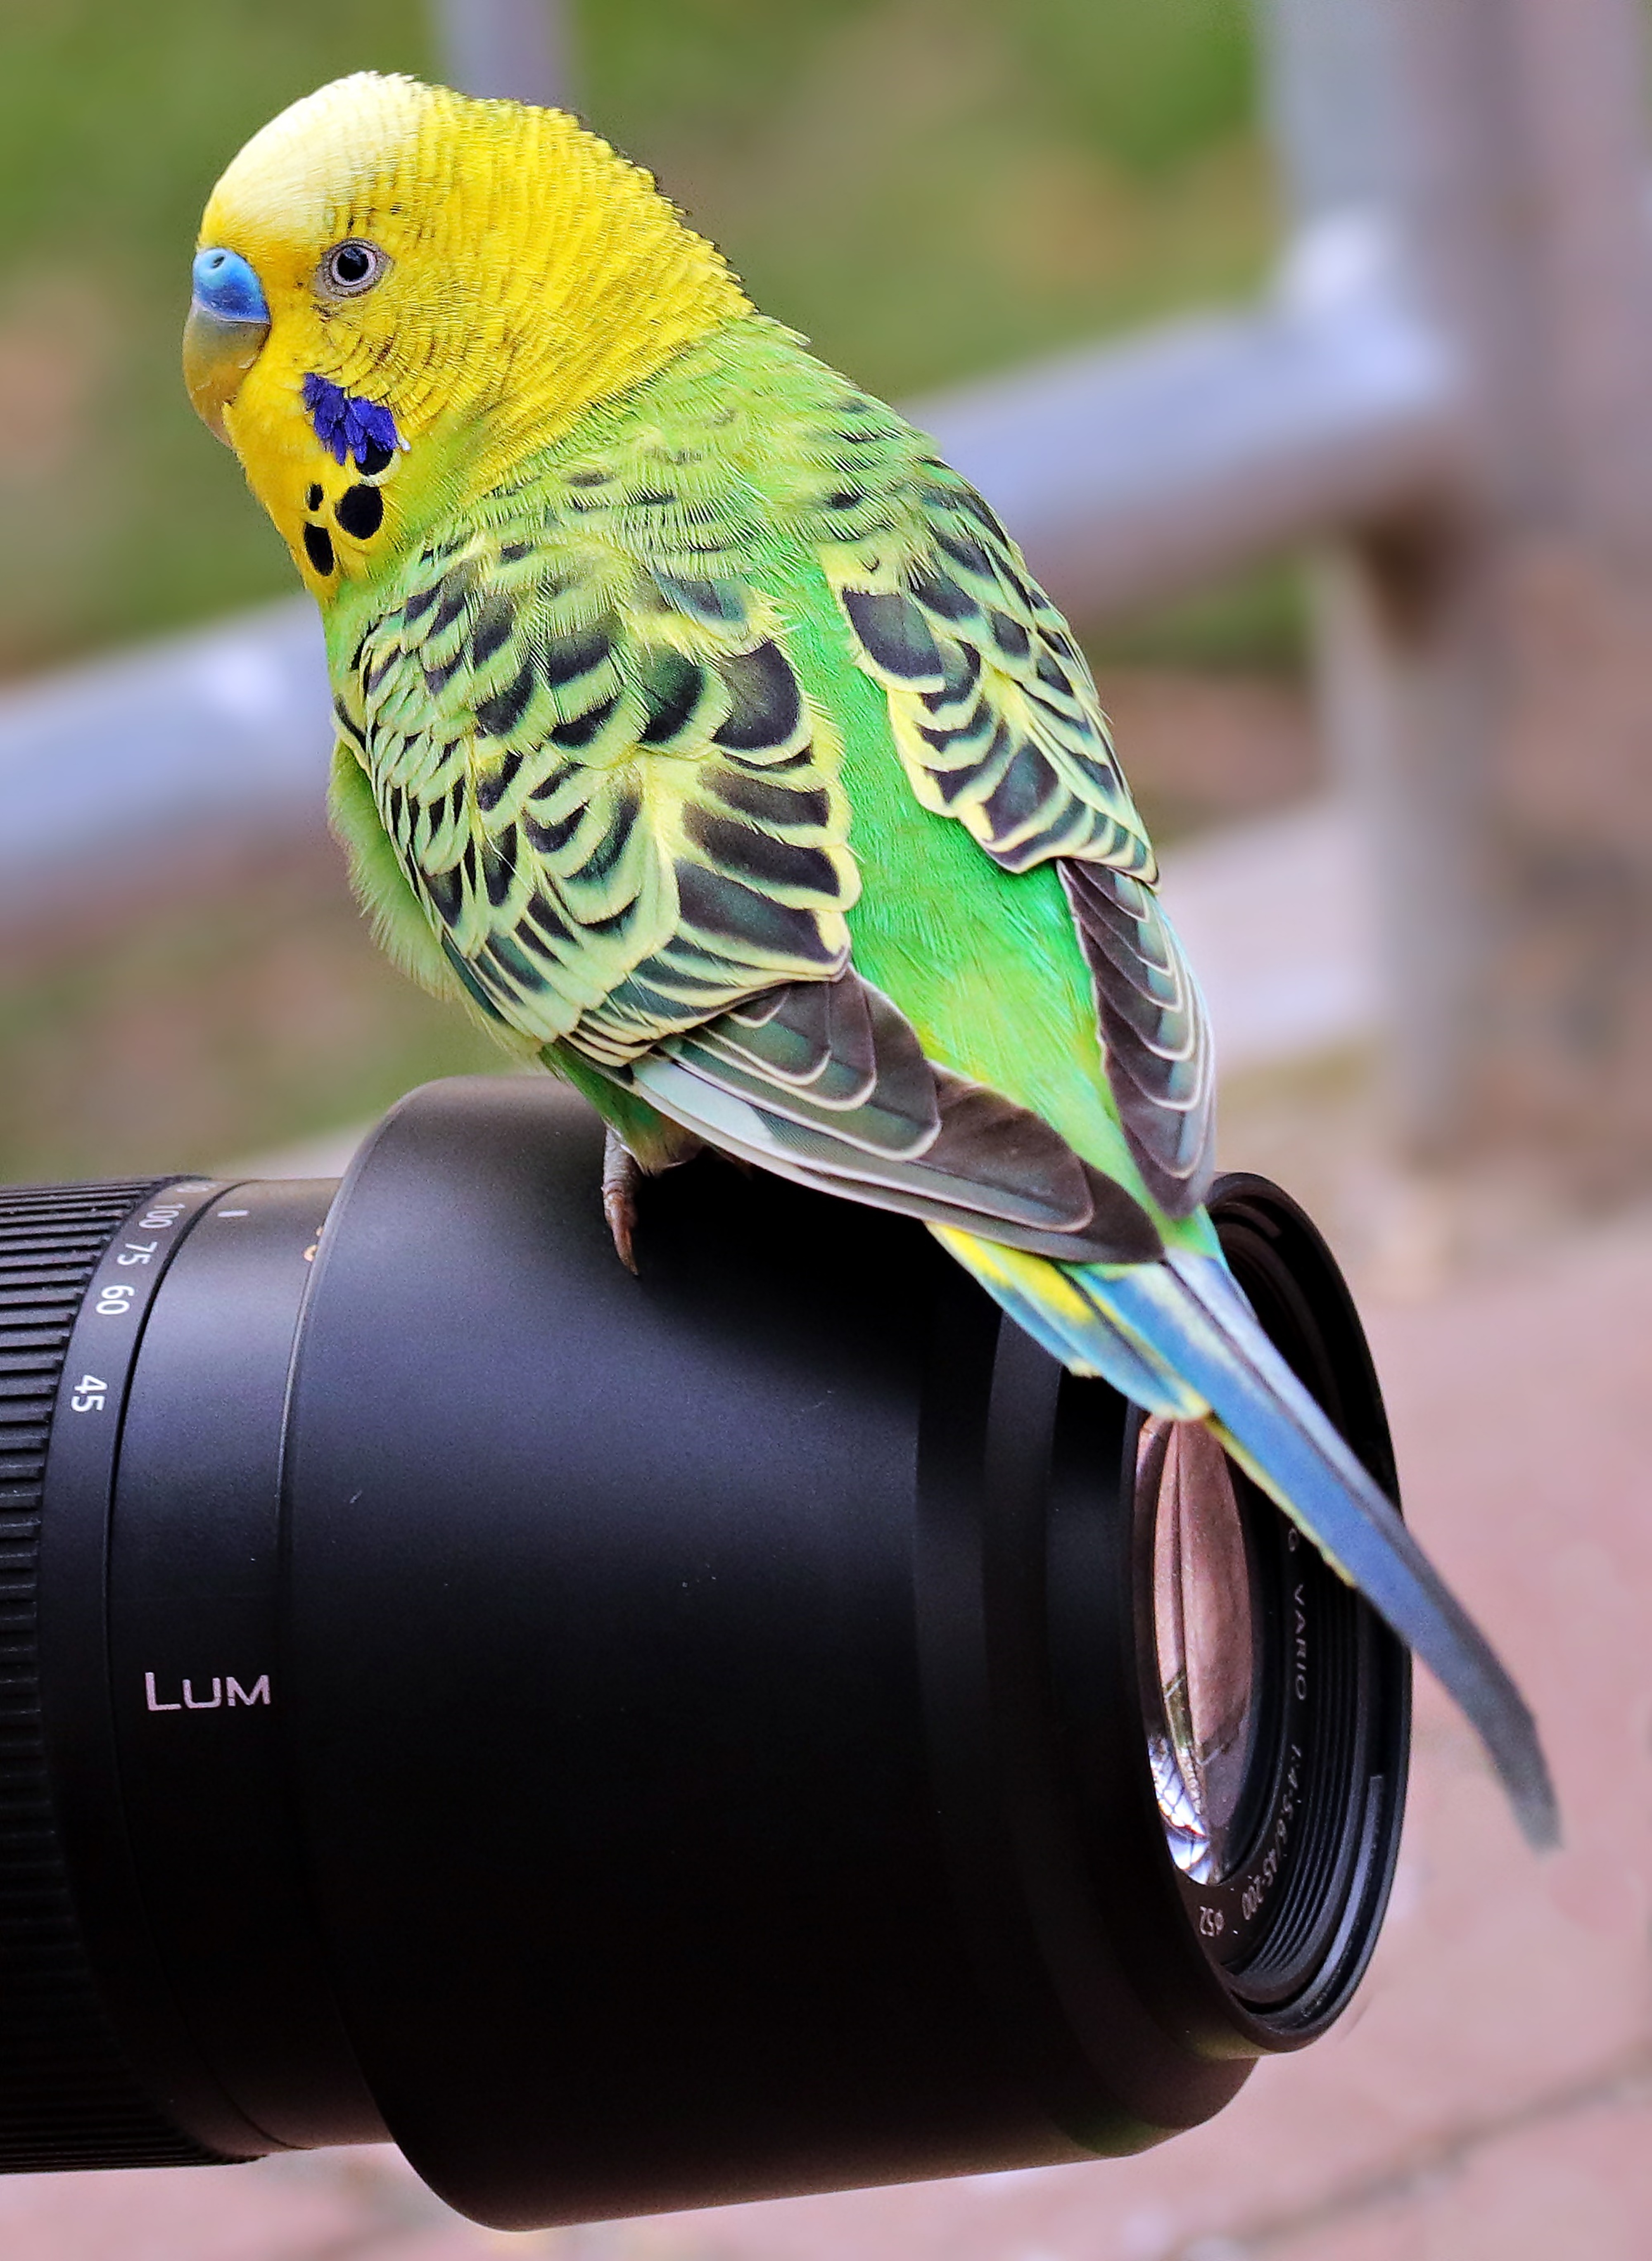 Budgie on the camera photo